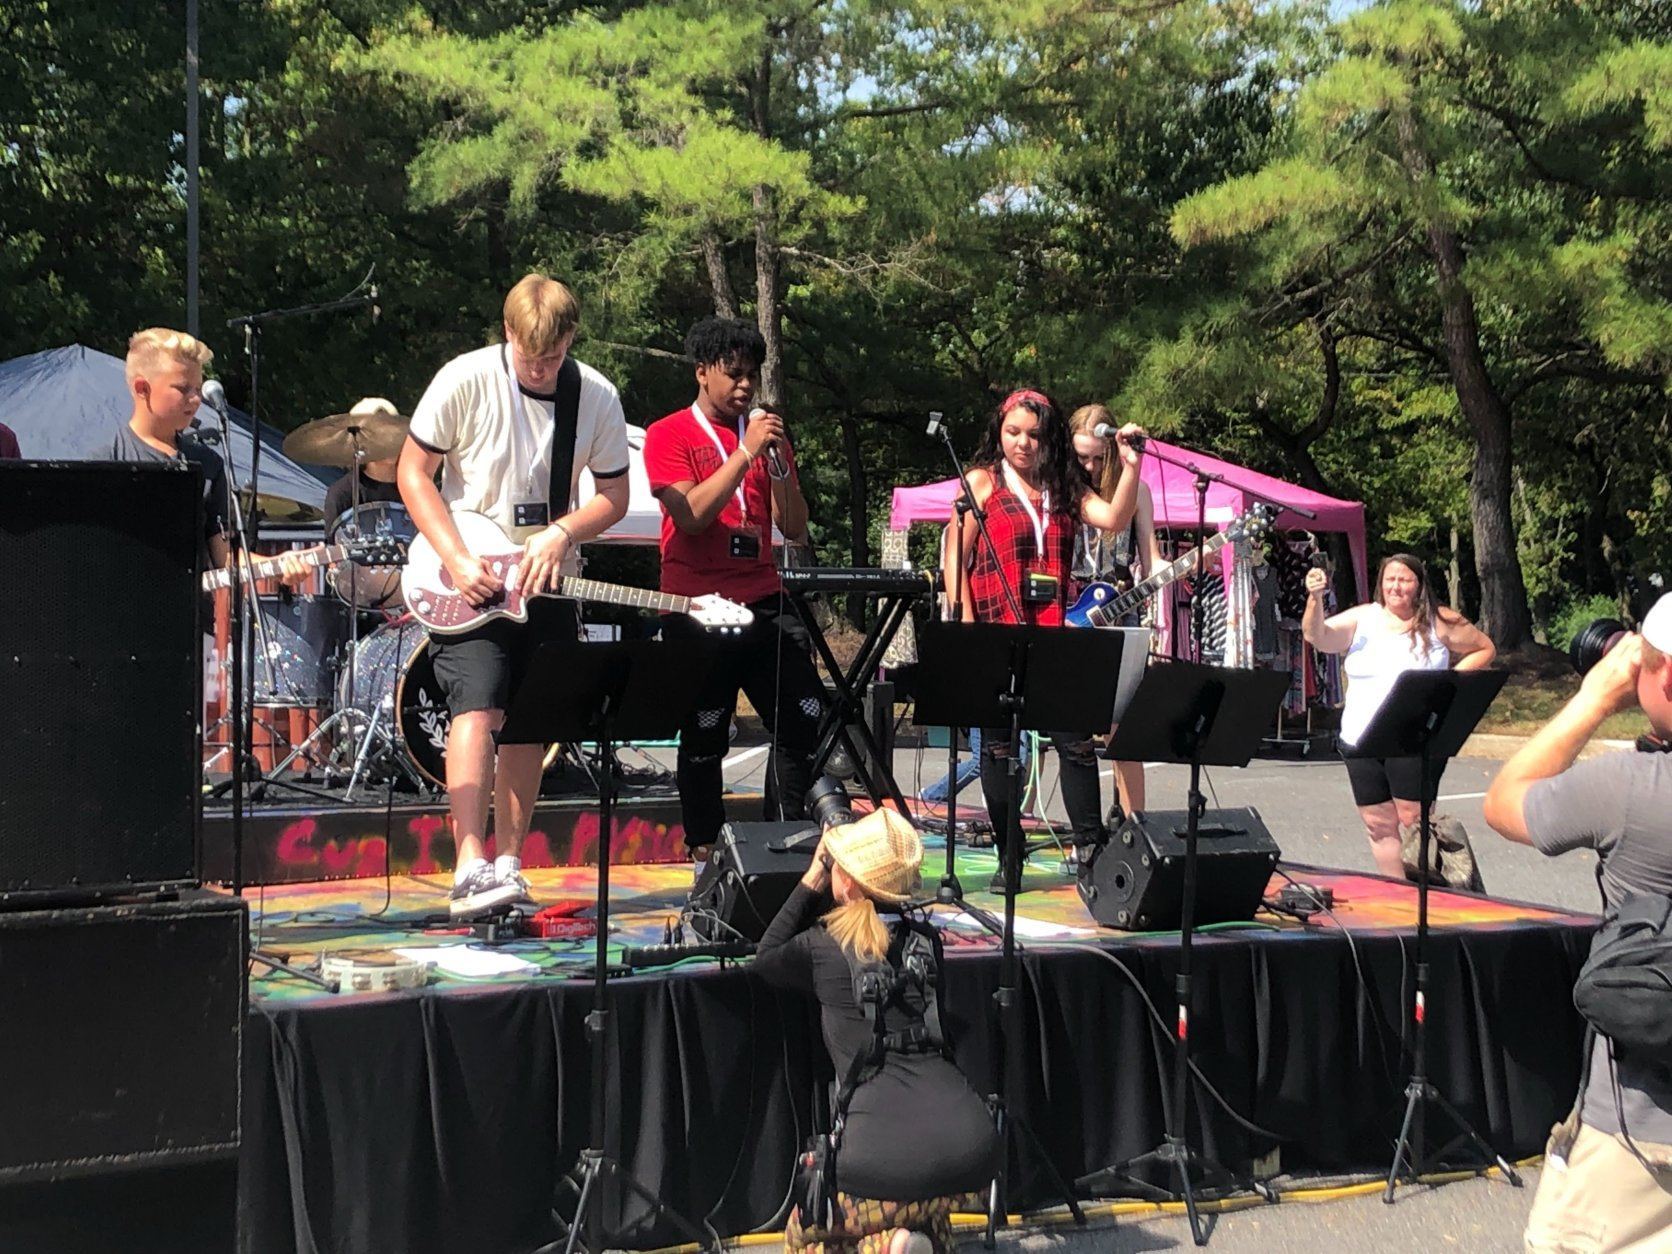 Kids perform at the Woodstock Anniversary Concert put on by School of Rock Columbia.